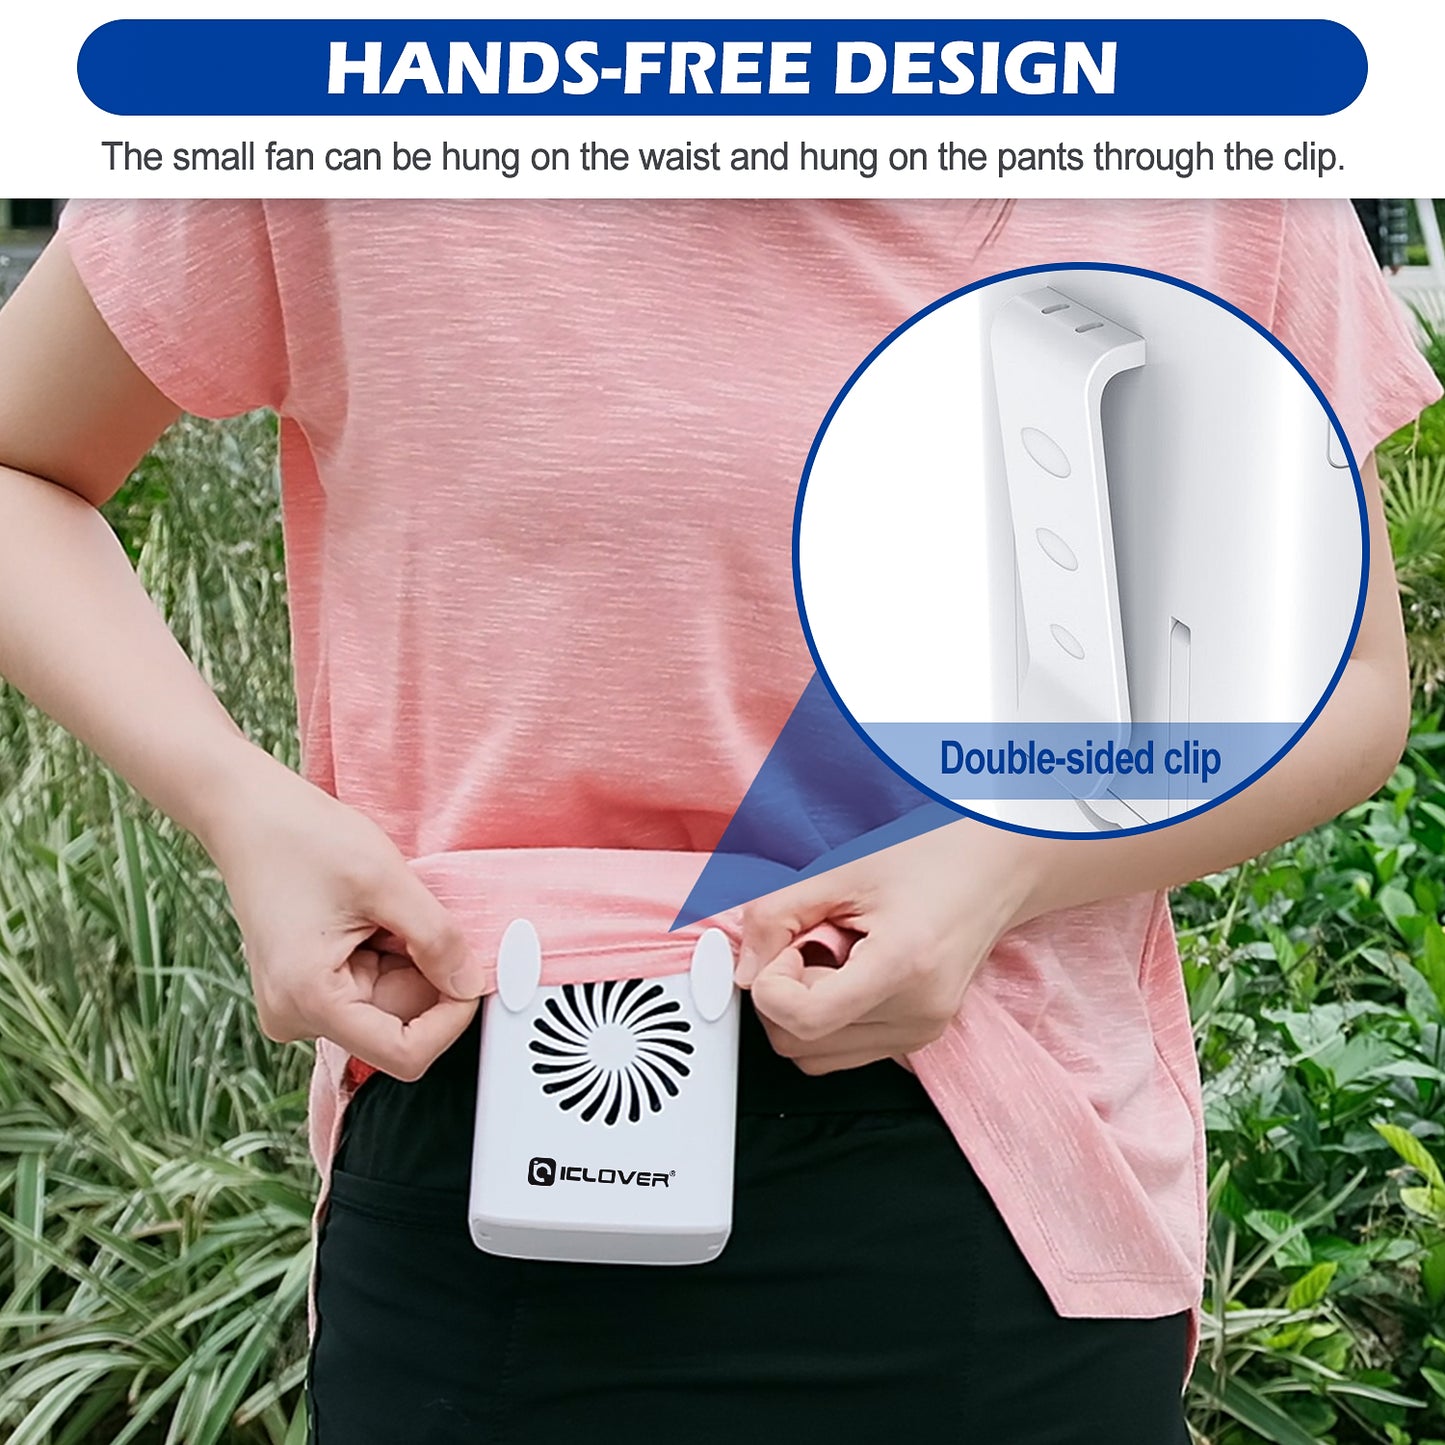 Mini Portable Hanging Waist Clip Fan, Personal USB Battery Operated Cooling Neck Halter Fan, Rechargeable Strong Airflow Hand-Free 3 Speeds Desk Fan for Home, Work & Outdoor Sport Running Hiking